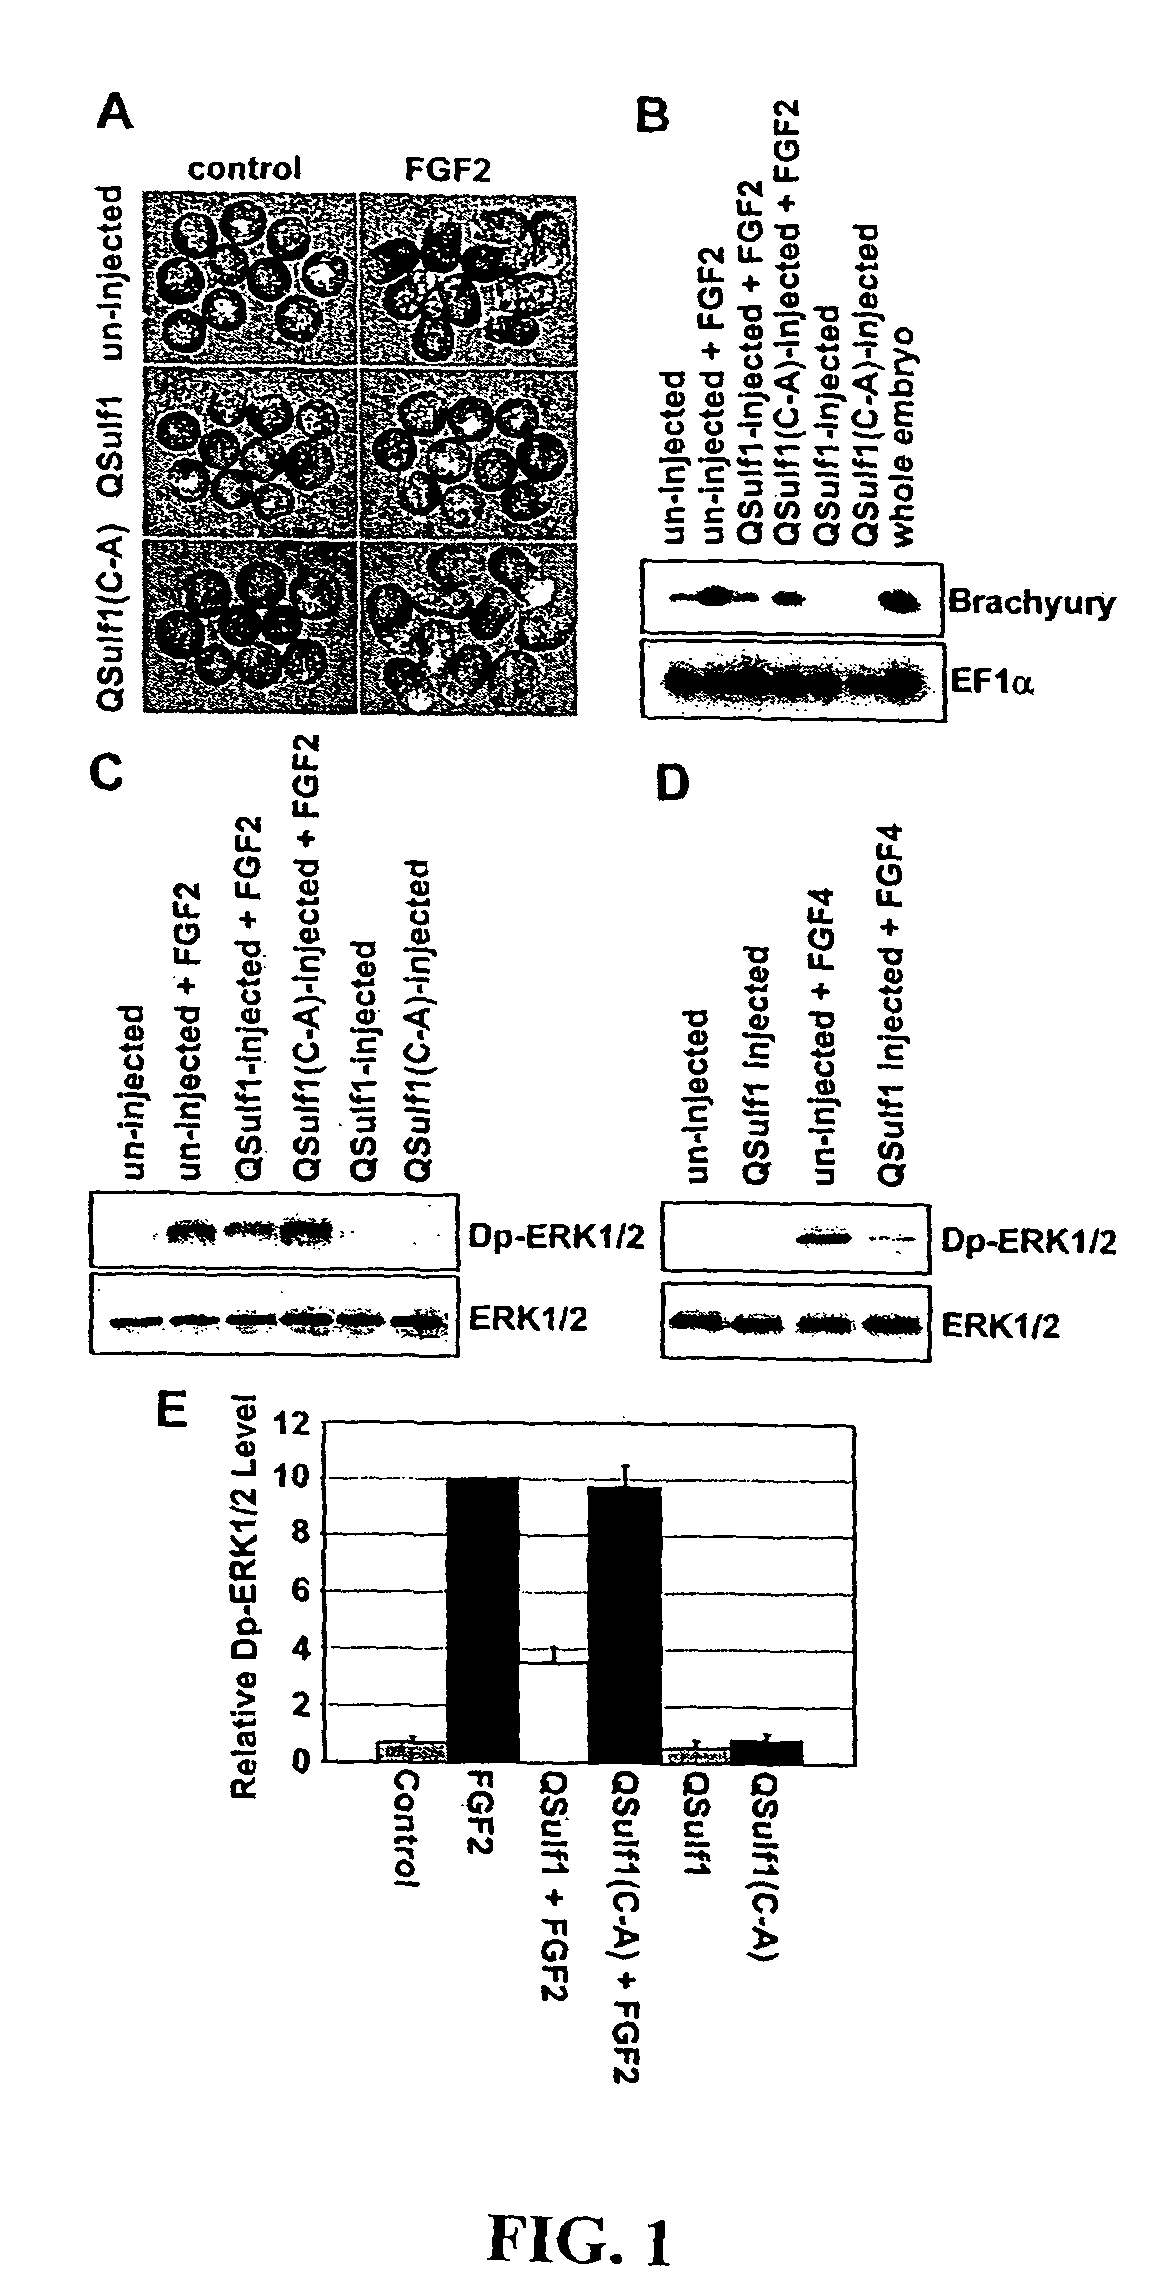 Inhibition of FGF signaling